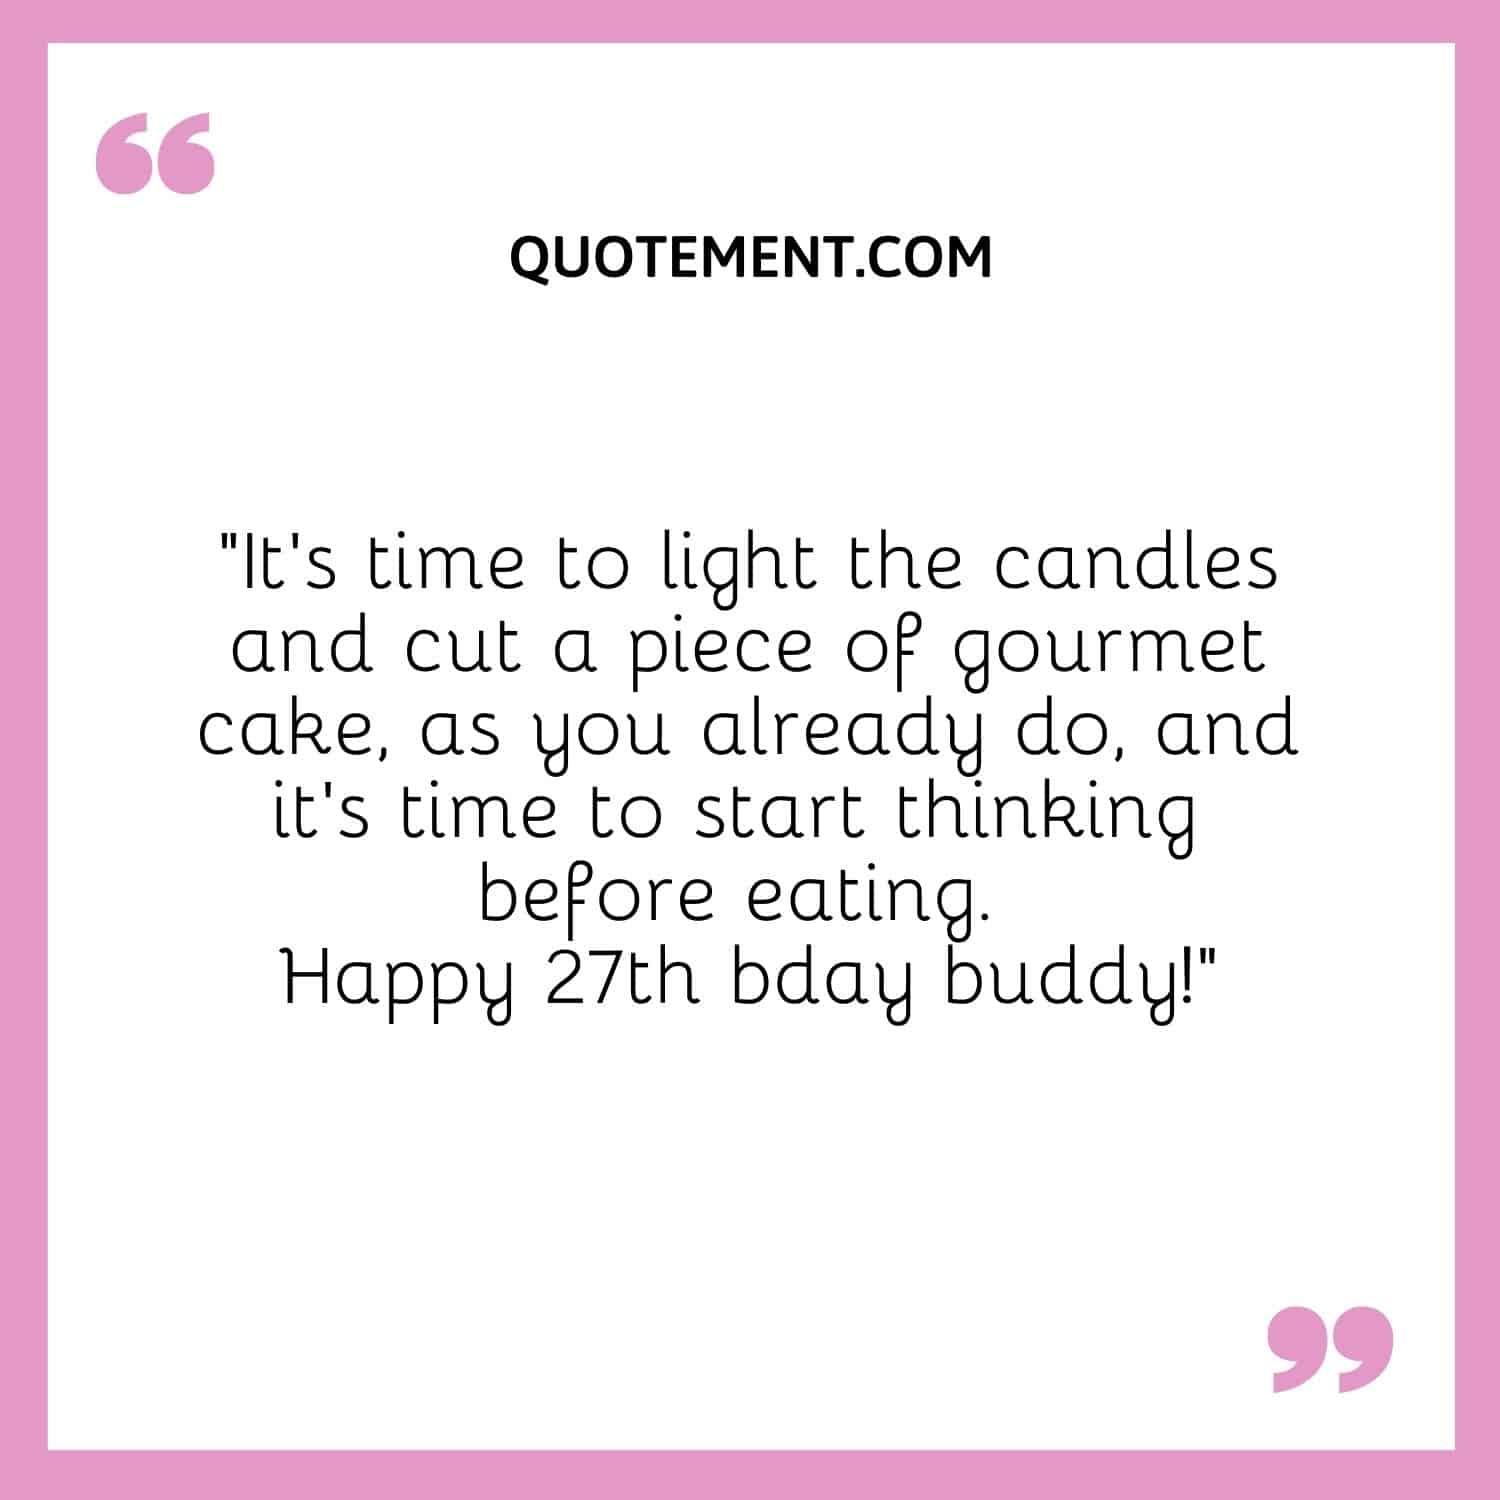 It’s time to light the candles and cut a piece of gourmet cake